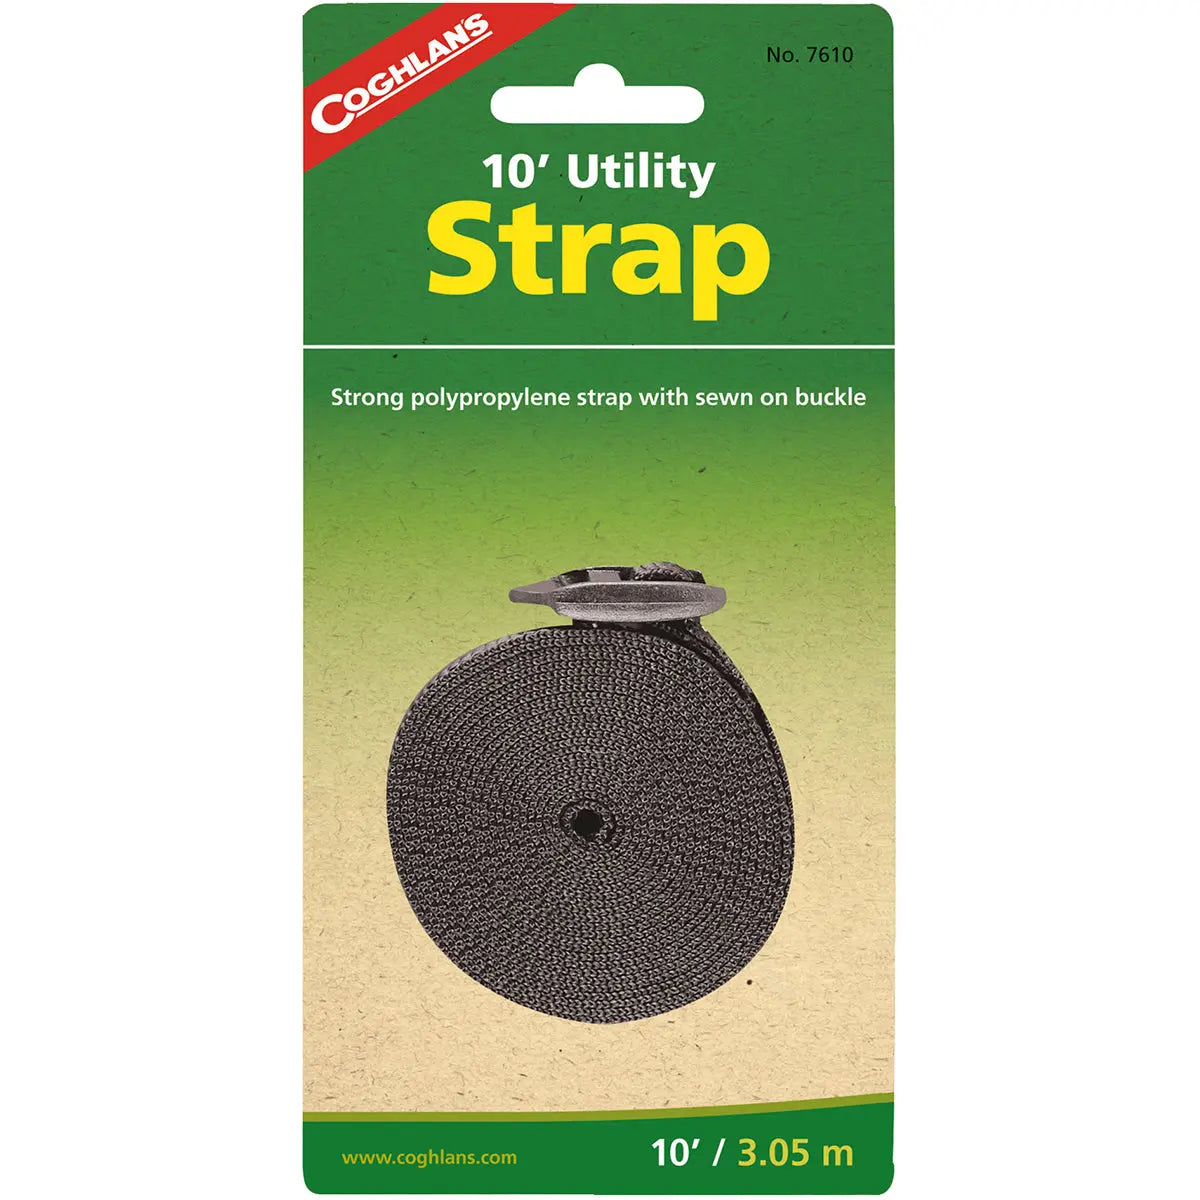 Coghlan's Utility Strap, Polypropylene Tie Downs Camping Boating Camp Coghlan's